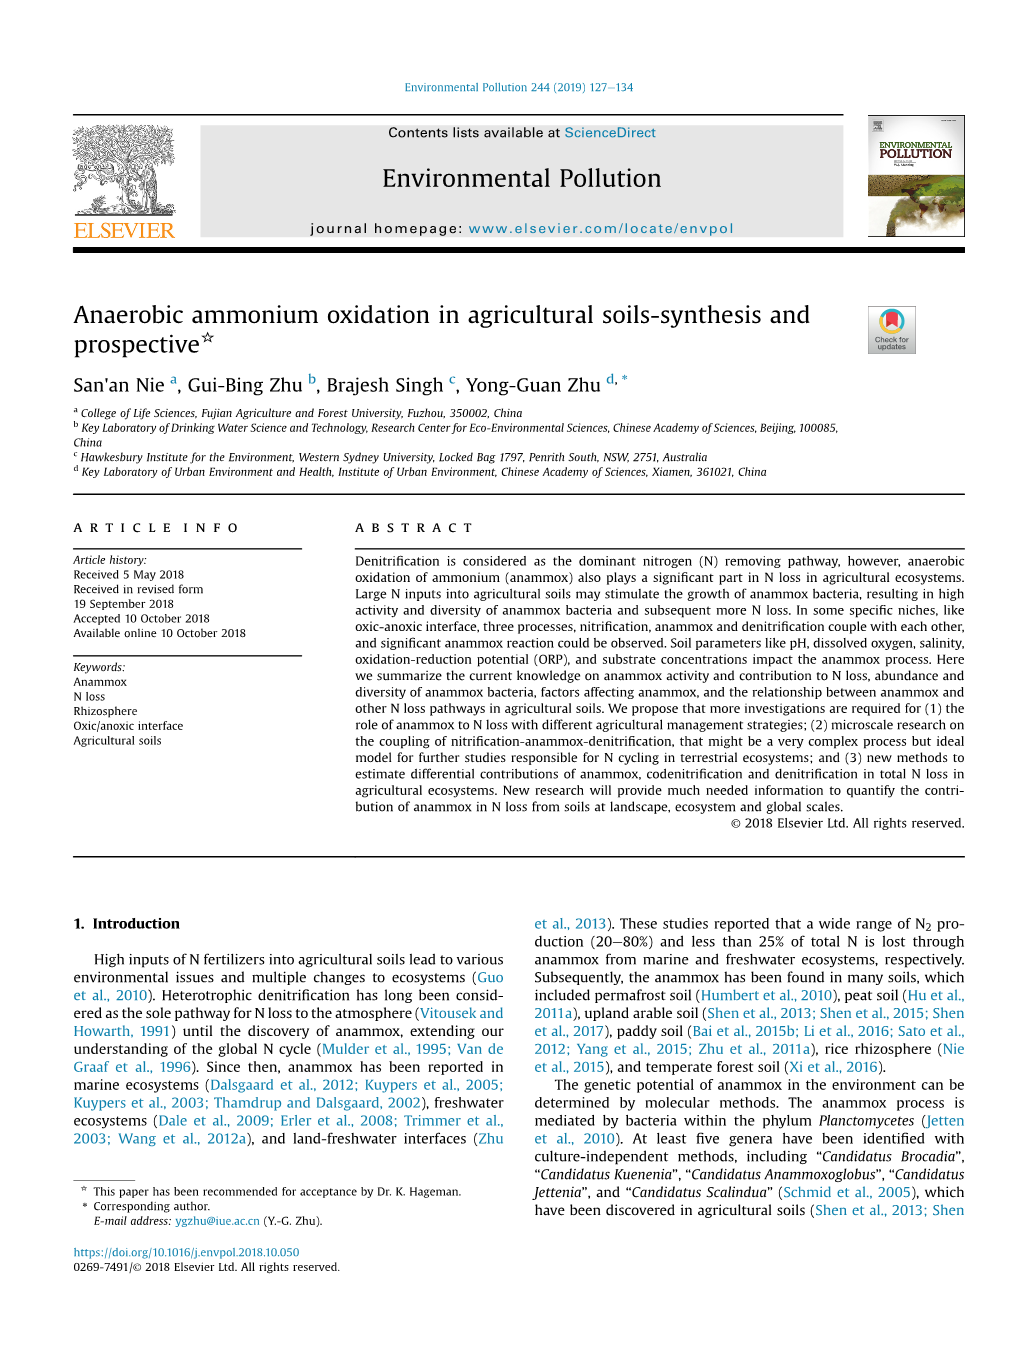 Anaerobic Ammonium Oxidation in Agricultural Soils-Synthesis and Prospective*